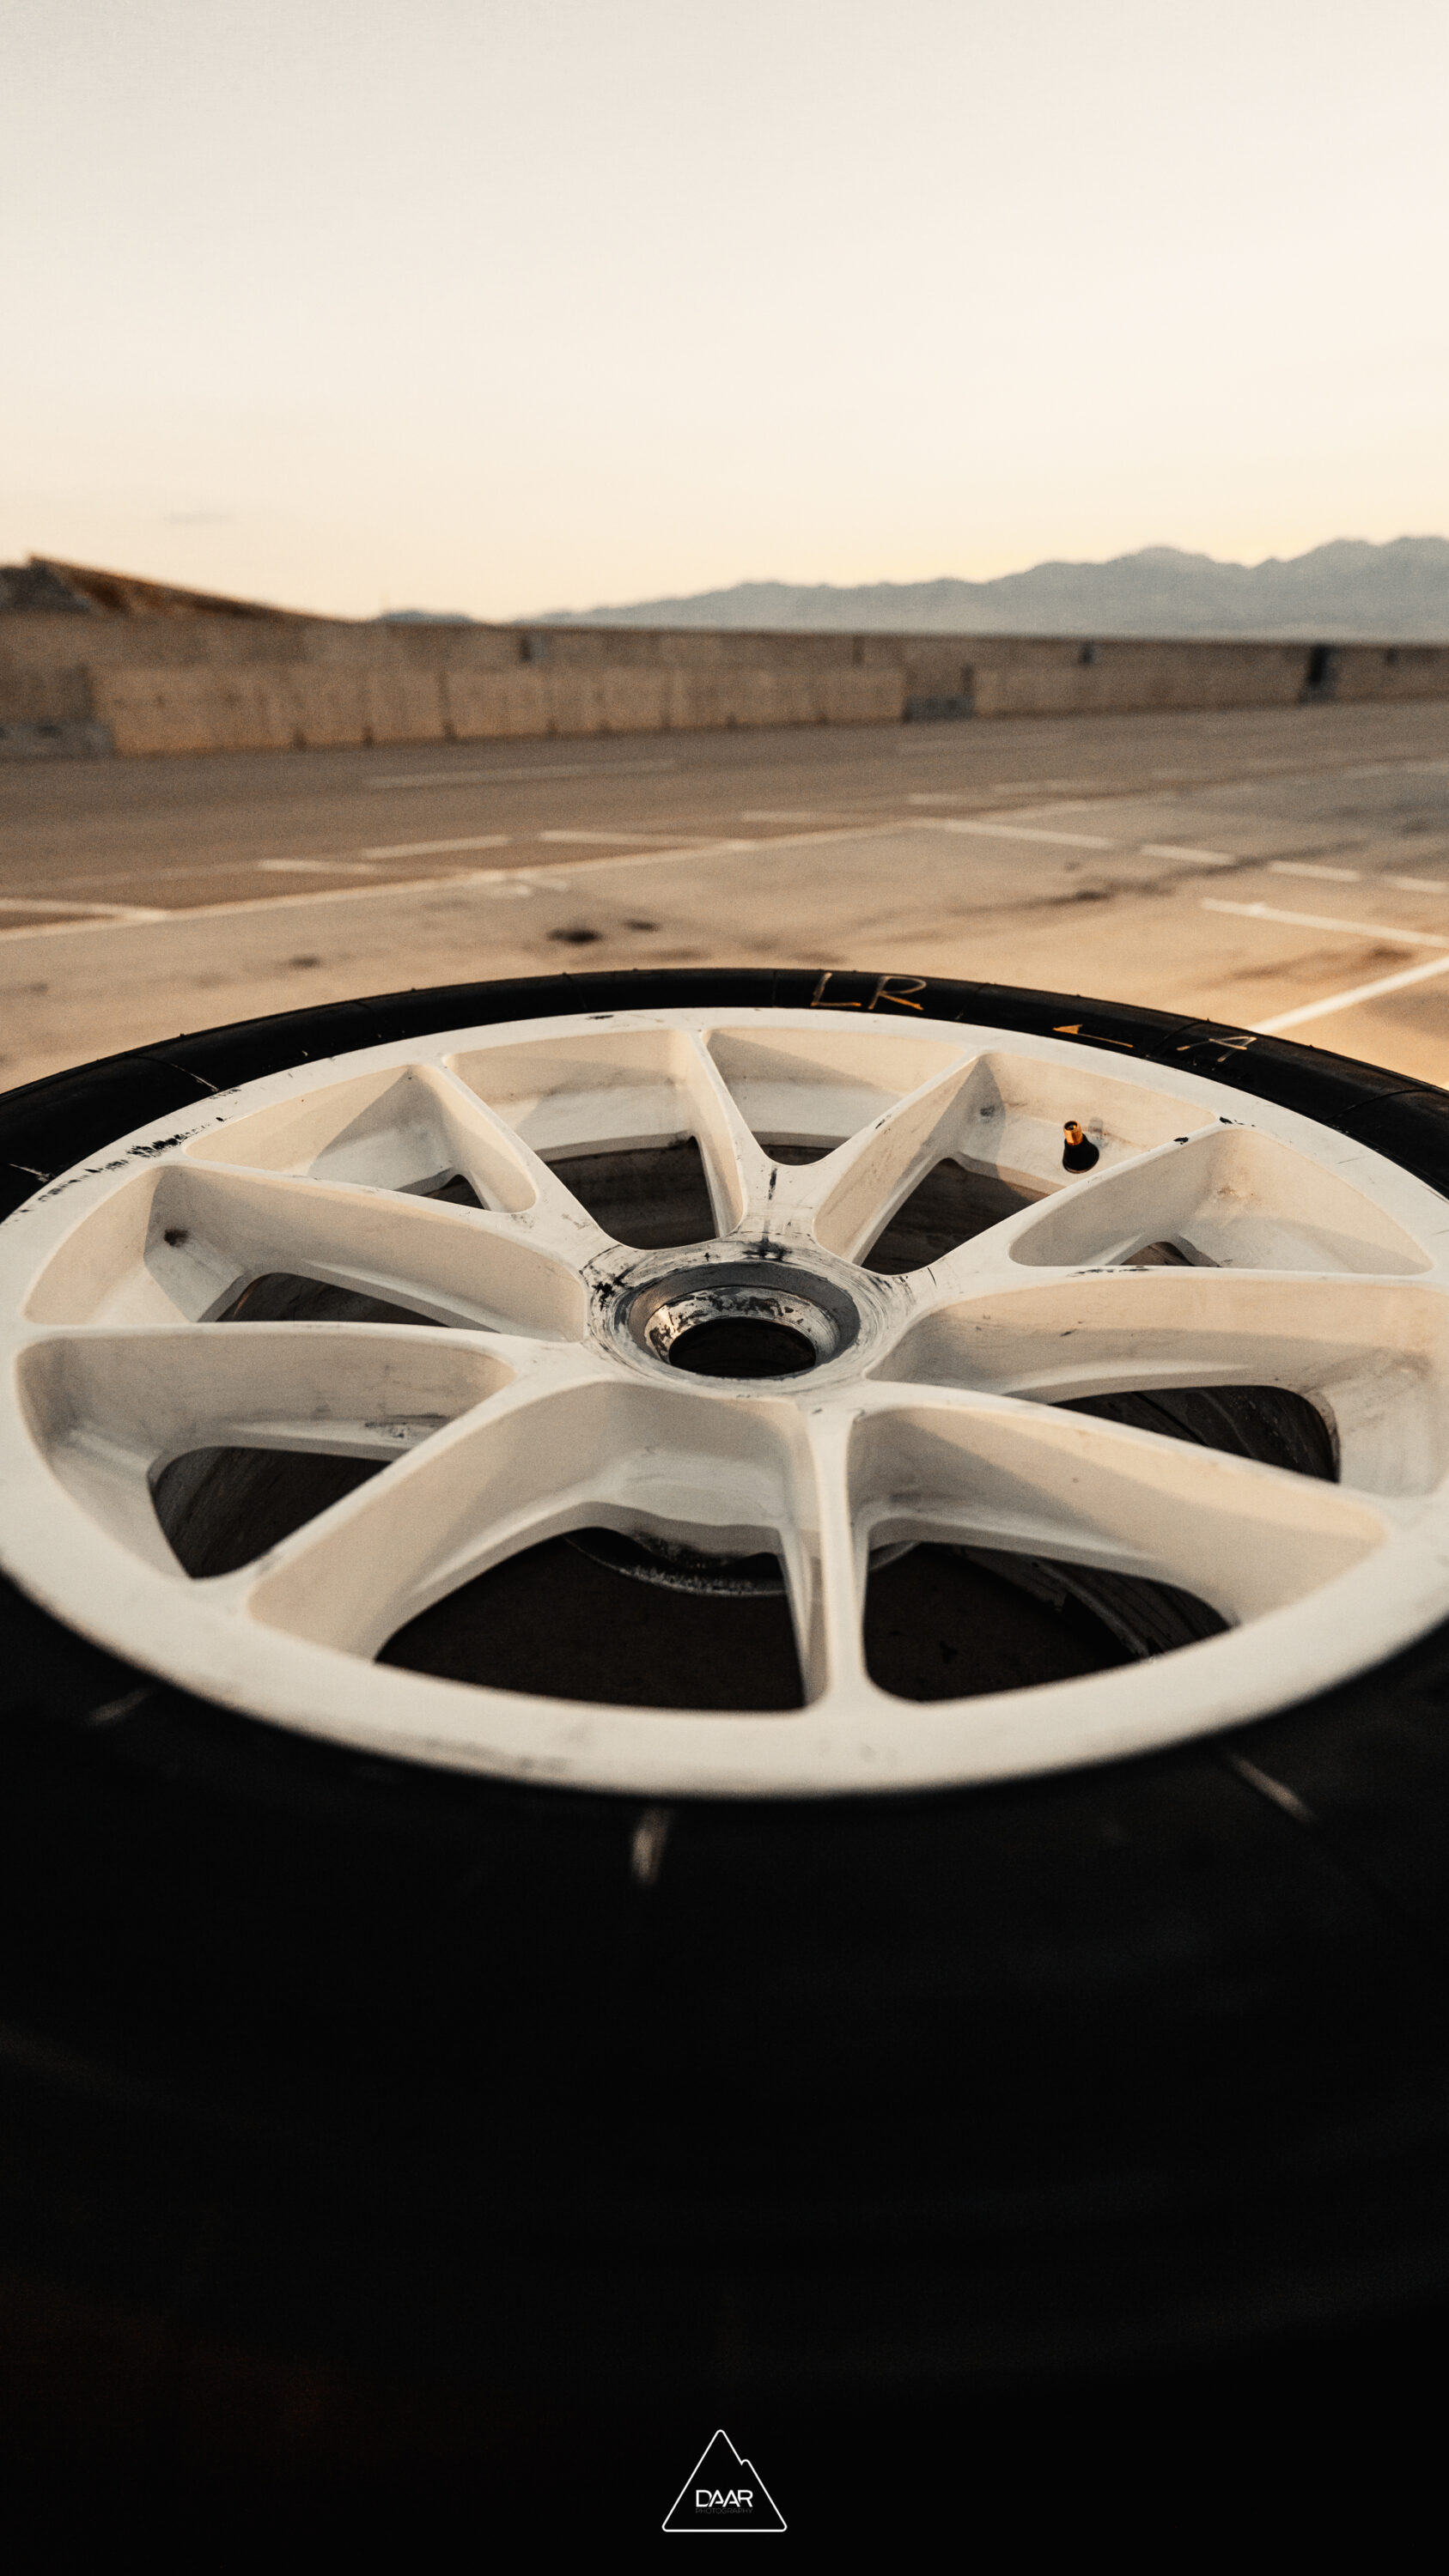 Why I Clean & Balance My Racing Wheels — Even When Remounting Older Tires